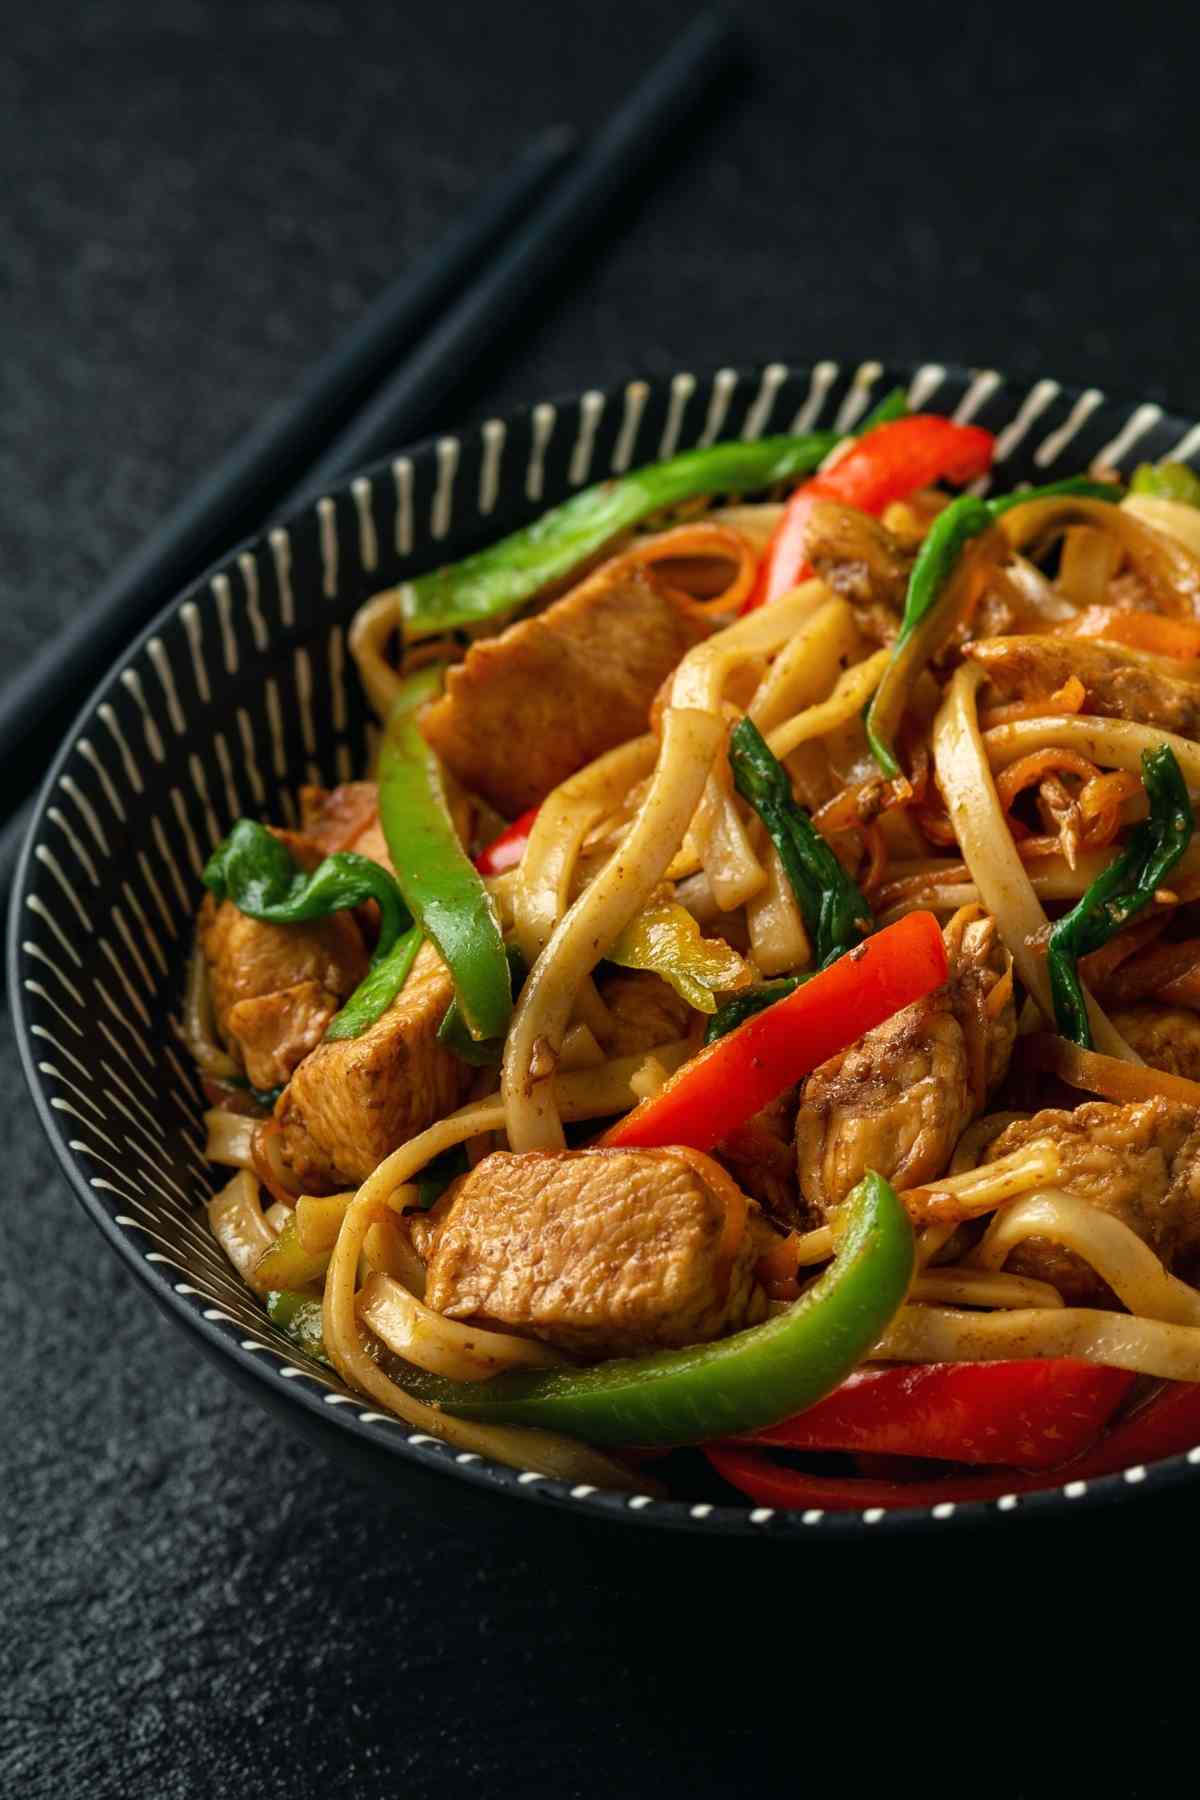 Chicken Chow Fun is loaded with wide noodles, tender chicken pieces, and crispy vegetables, and it's ready in minutes! Prepare to be amazed at what you can create with just a few ingredients and a nonstick skillet!